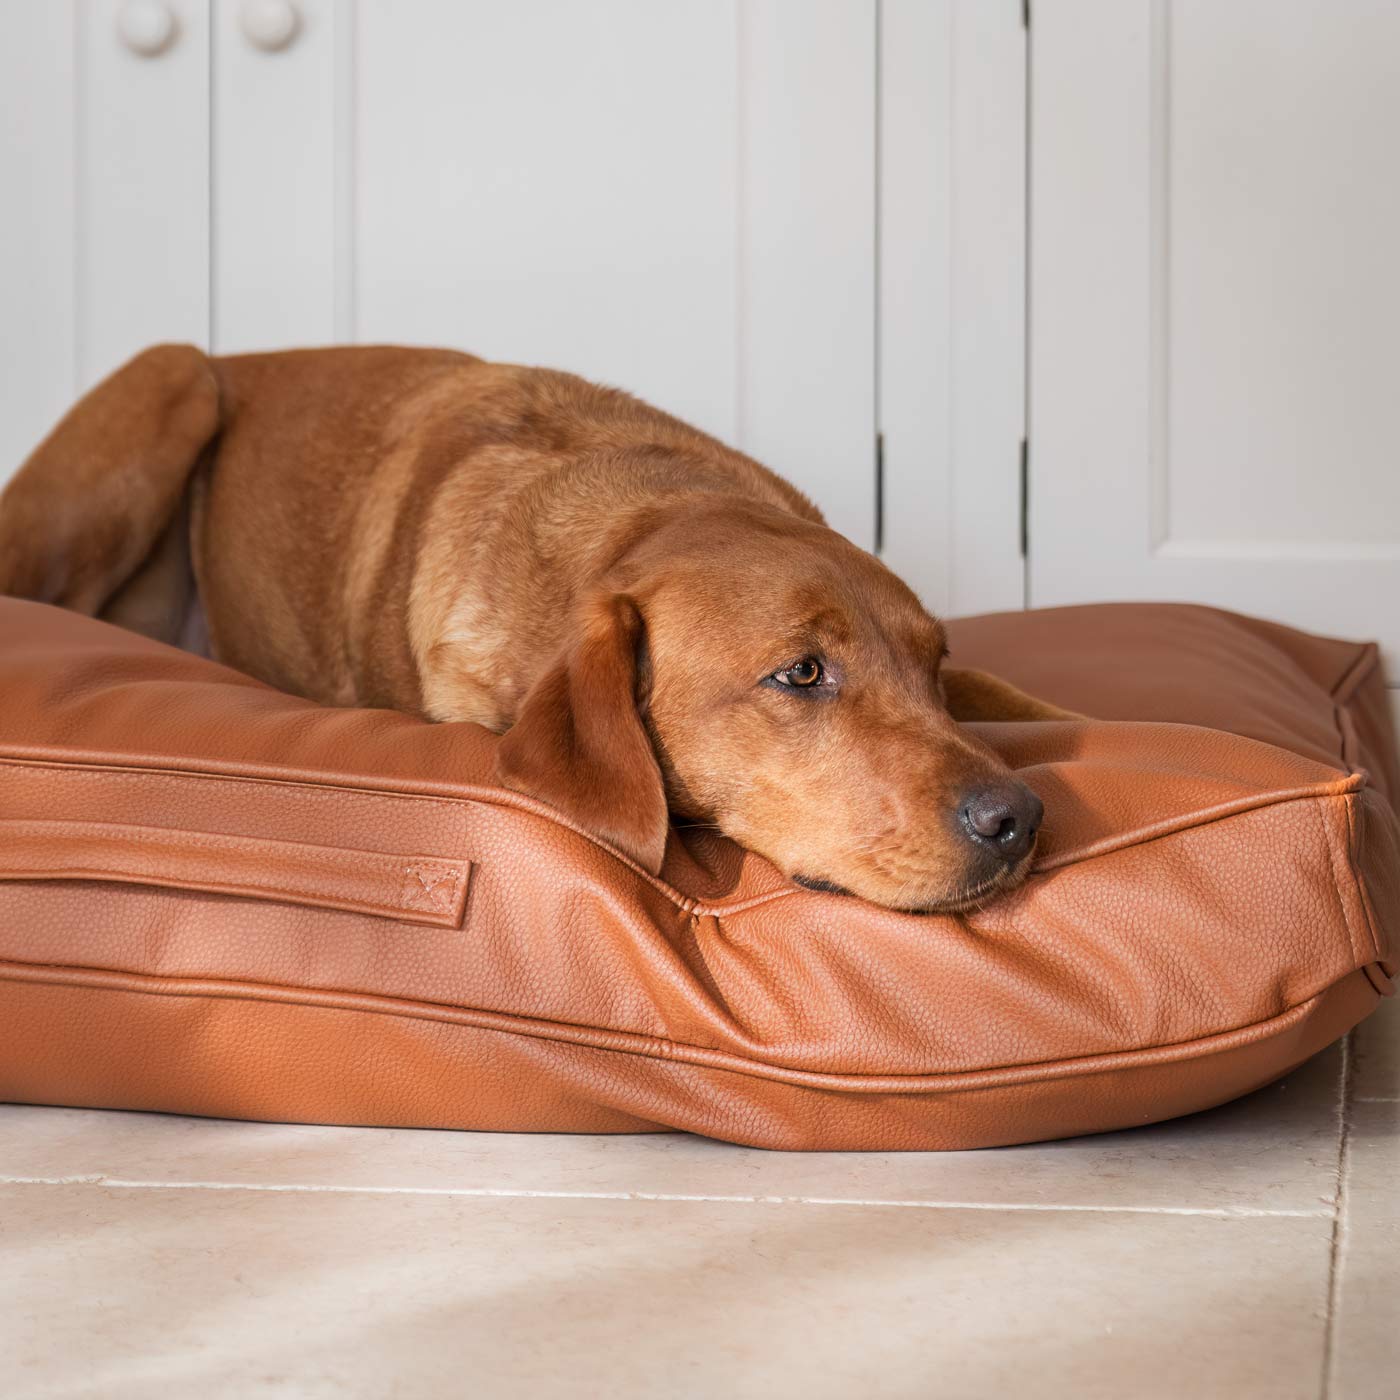 Luxury Dog Cushion in Rhino Tough Ember Faux Leather, The Perfect Pet Bed Time Accessory! Available Now at Lords & Labradors